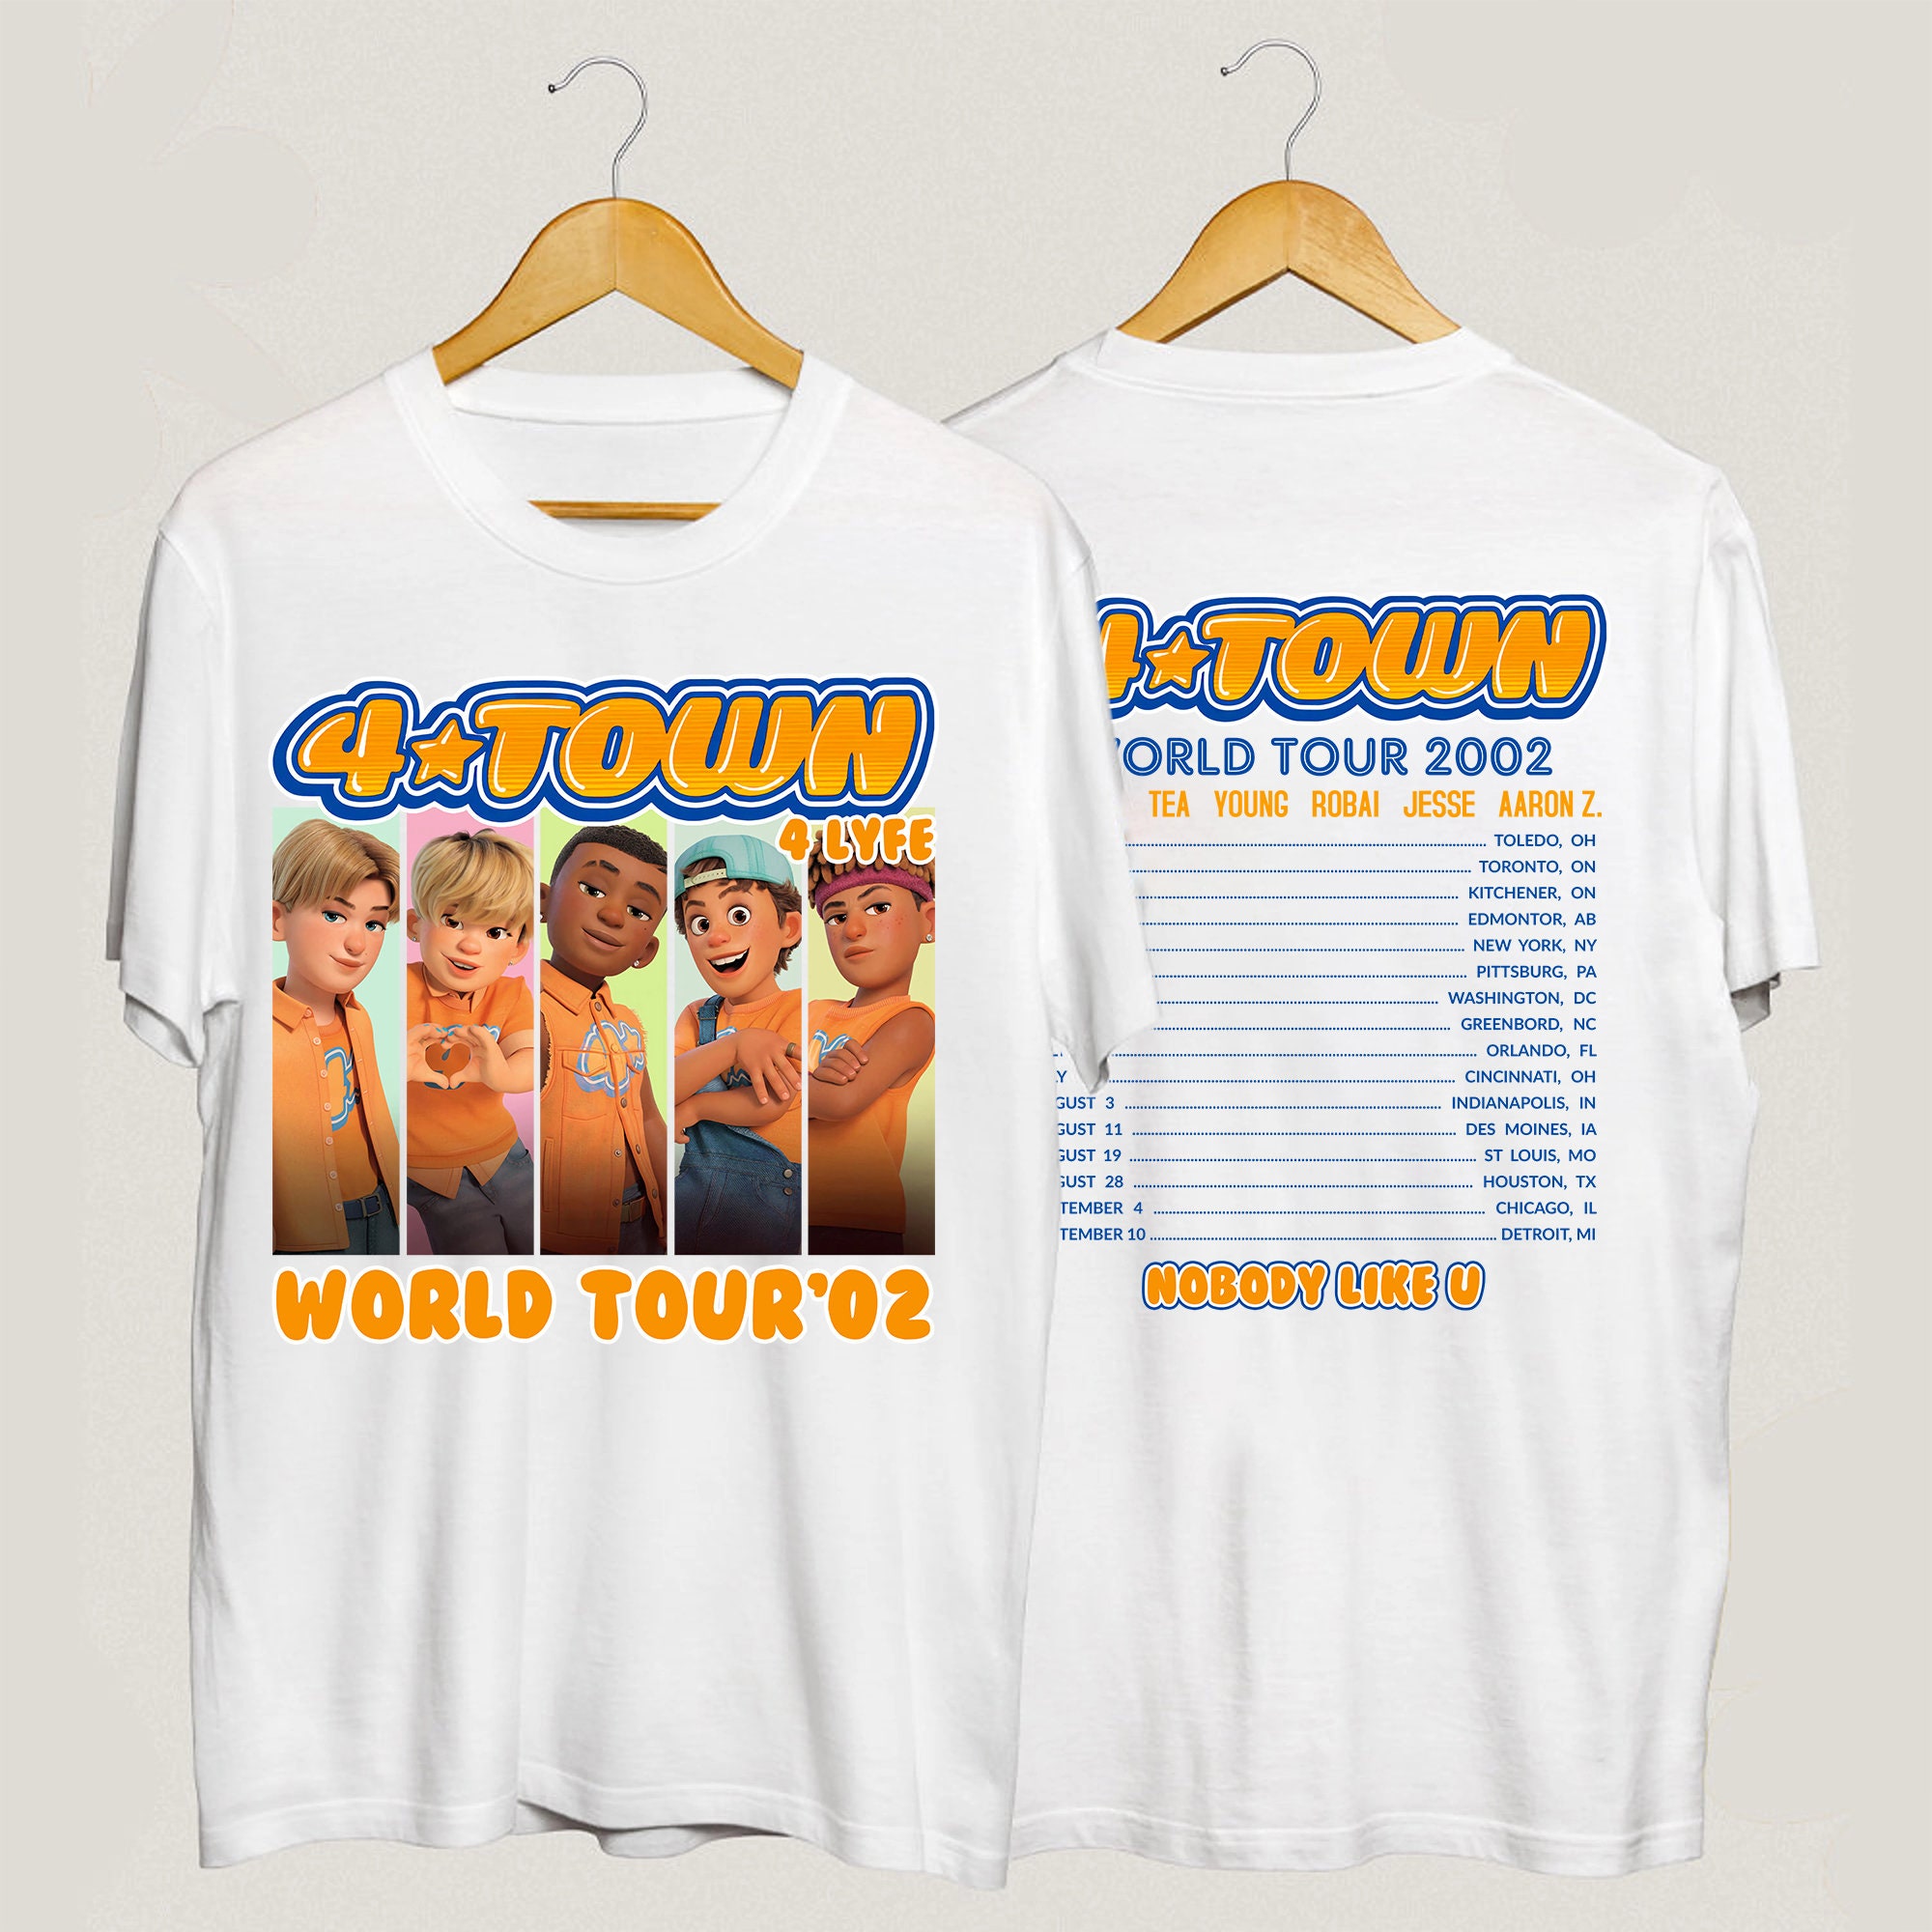 Turning Red 4*TOWN 2002 Tour Double Sided T-Shirt